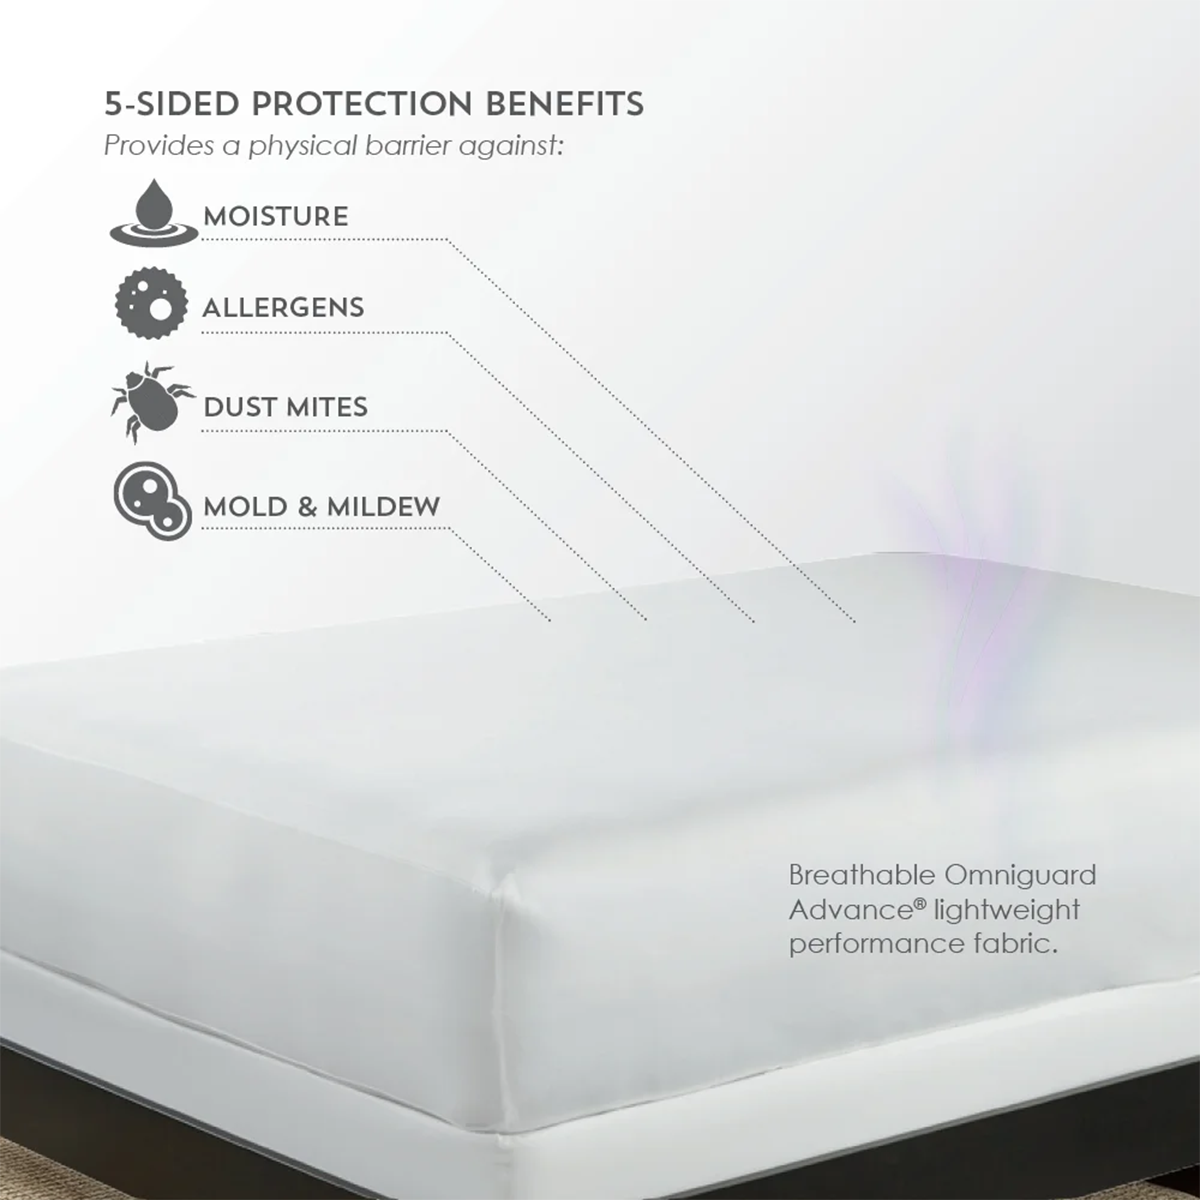 aromatherapy mattress protector by purecare benefits for people with allergies